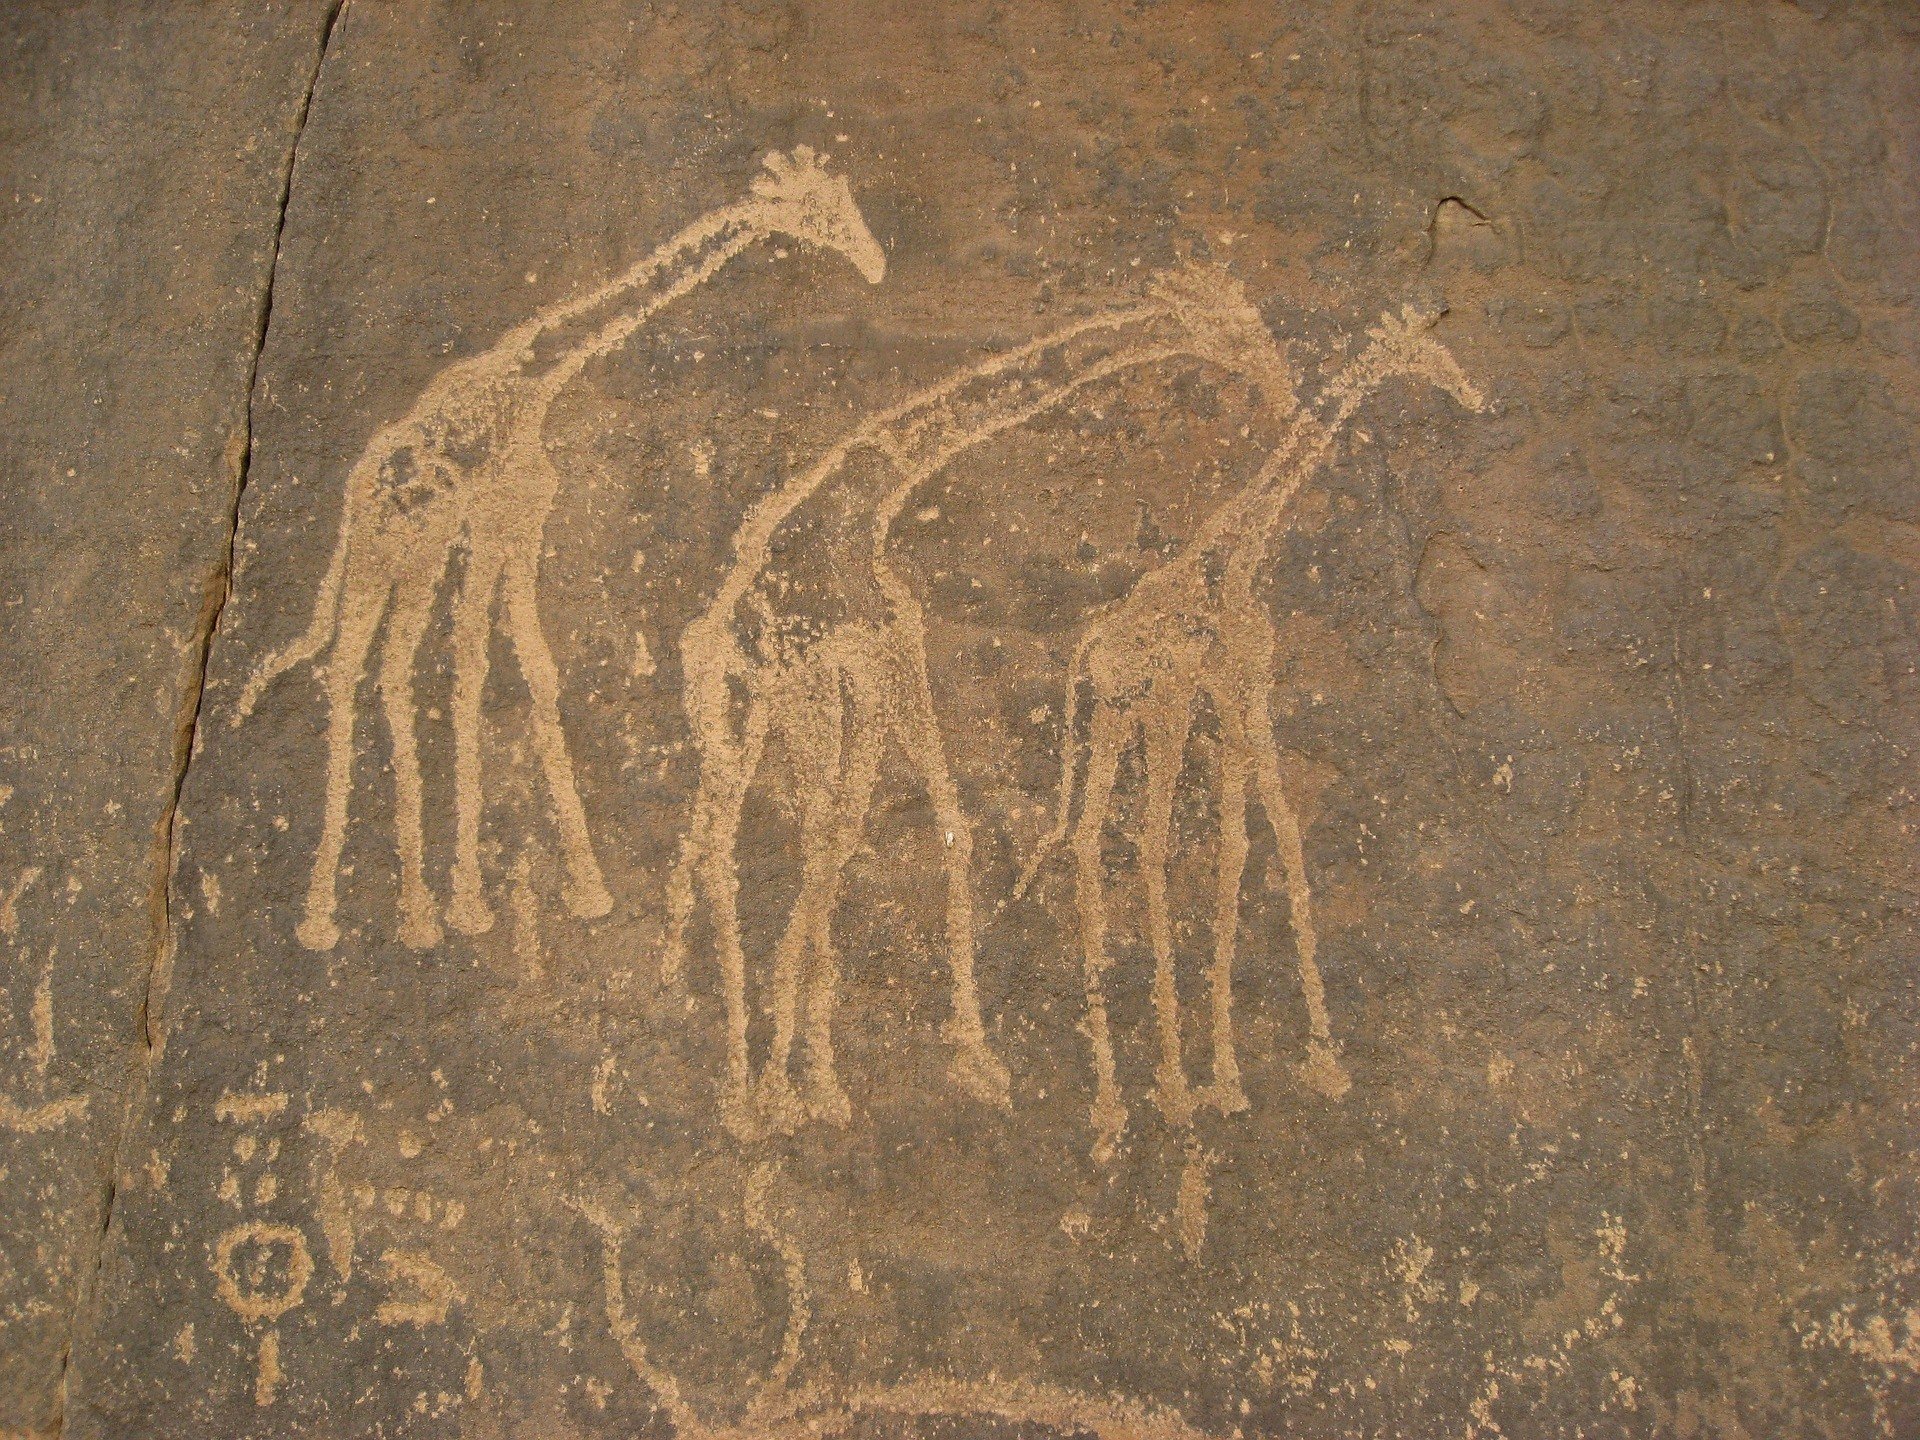 Cave paintings